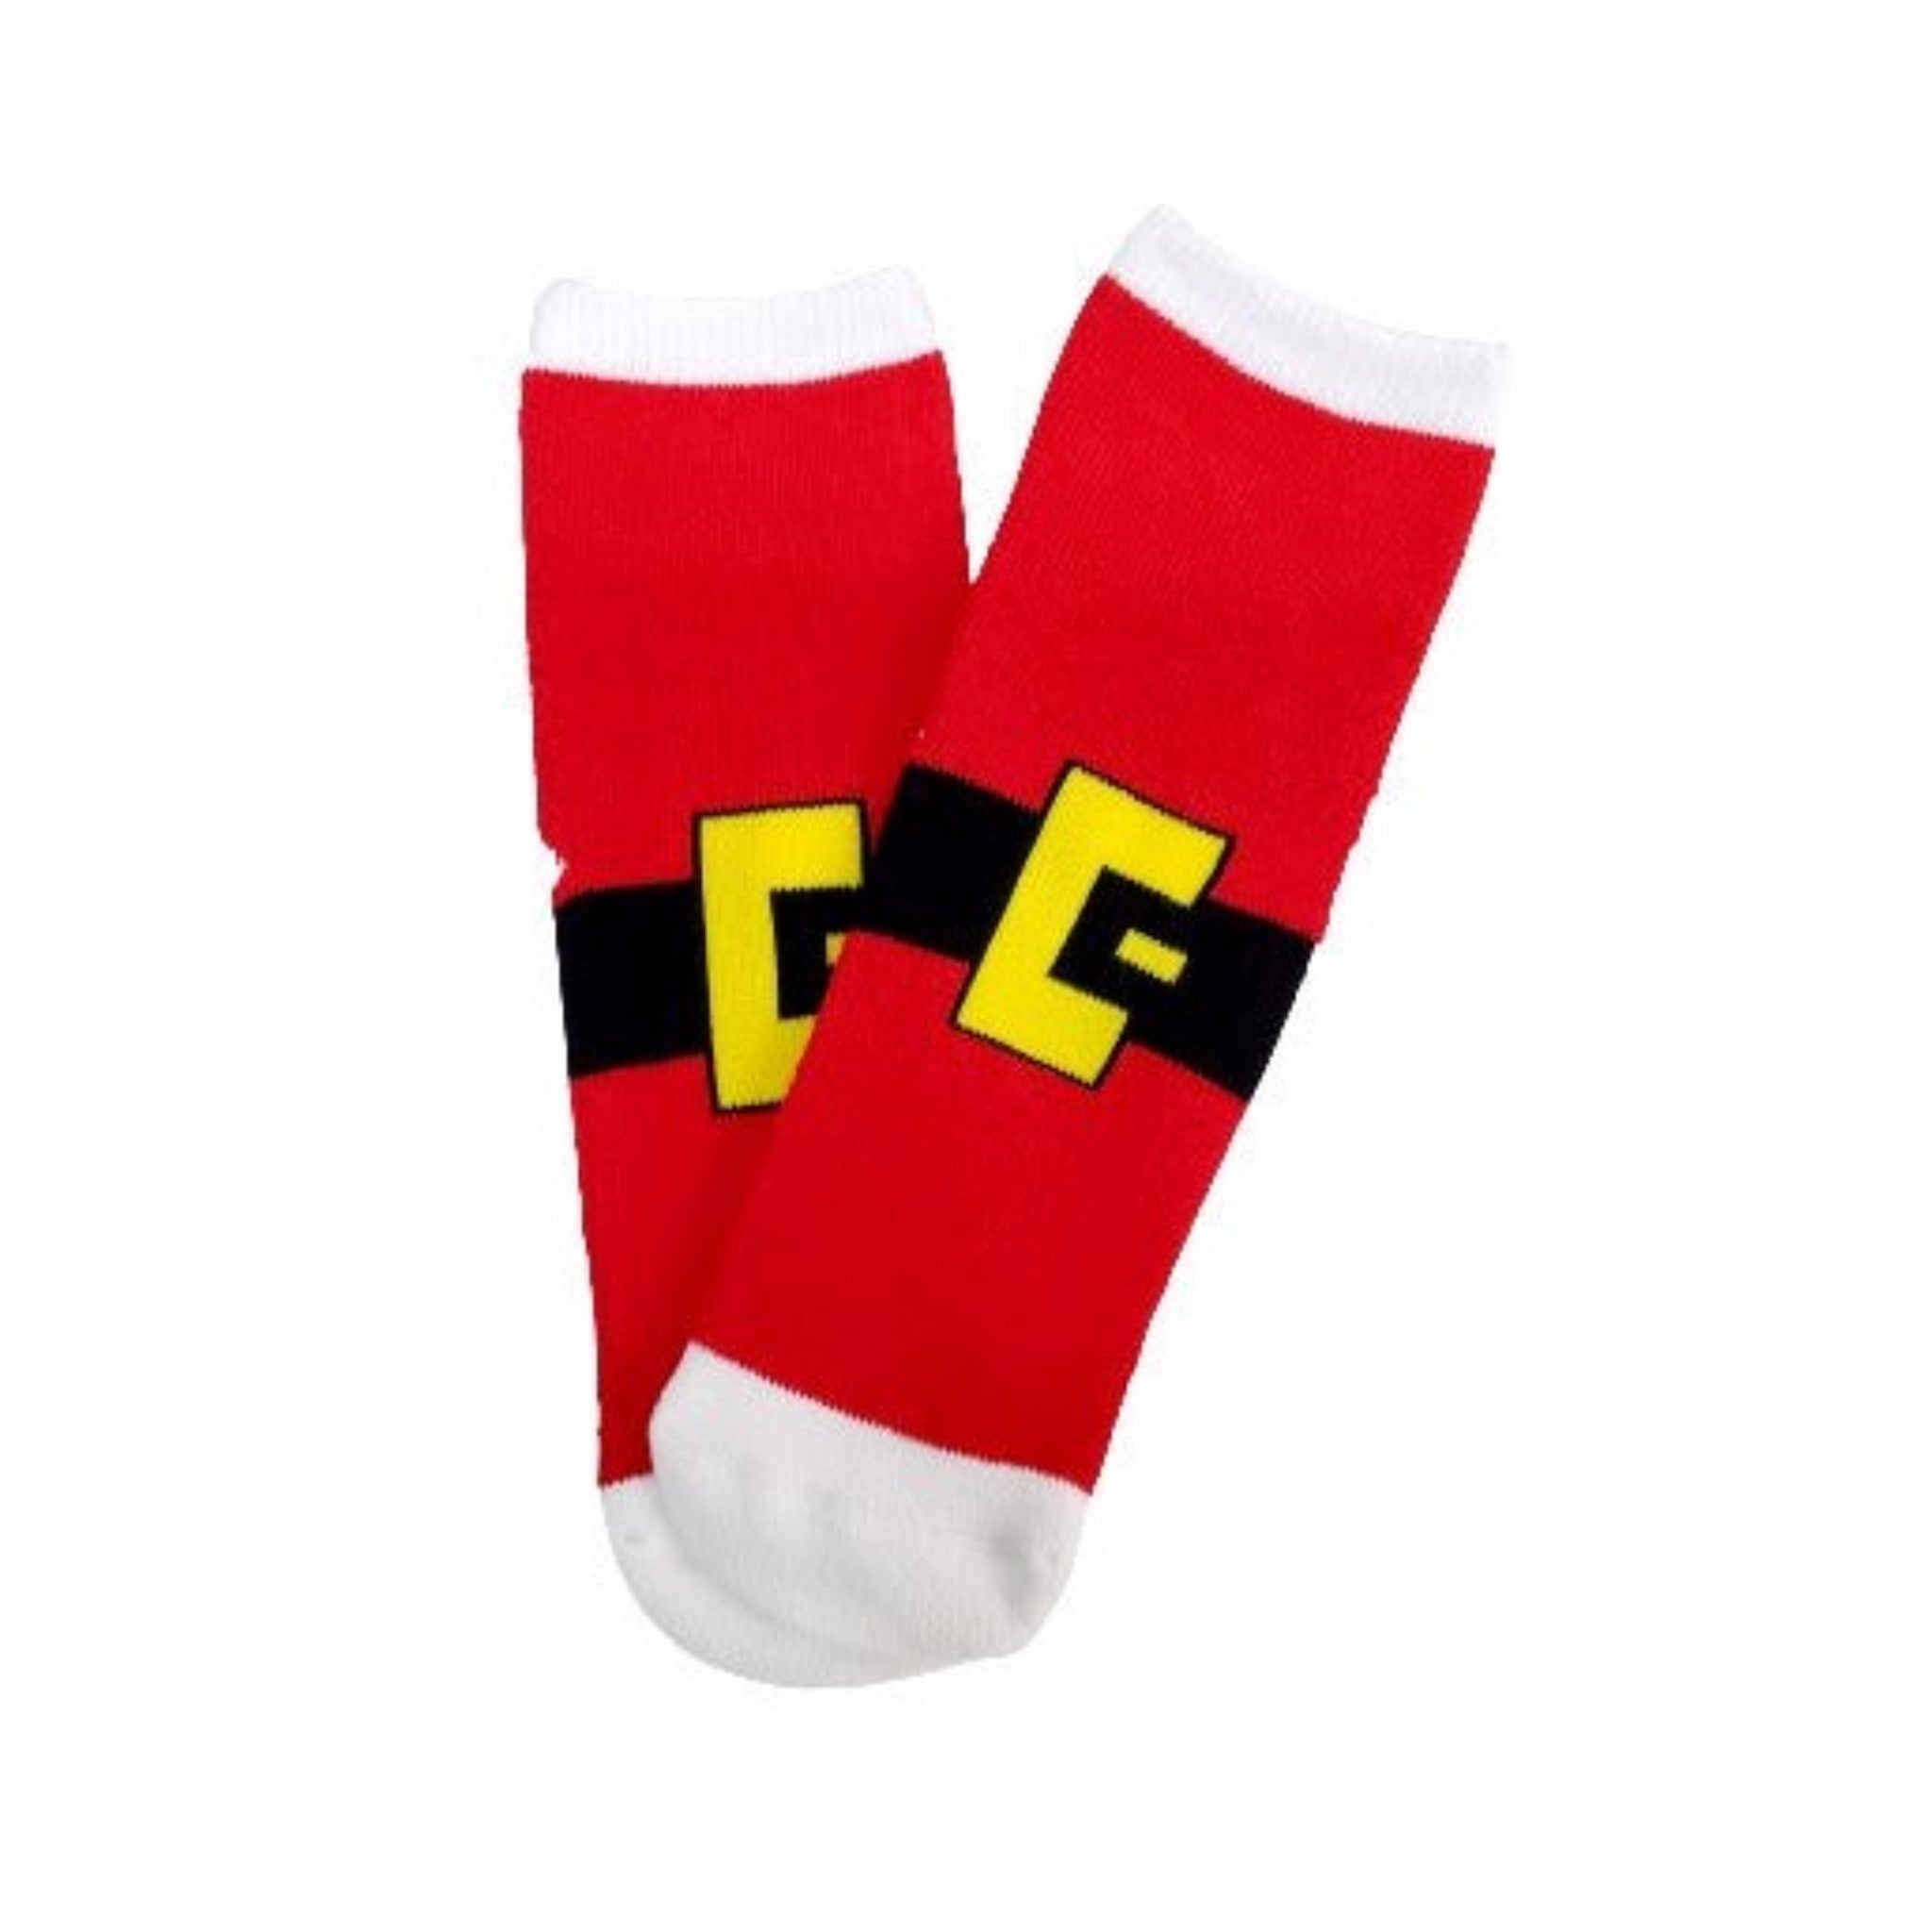 Santa's Belt Socks for Kids (Ages 6 mo. to 7 yr)